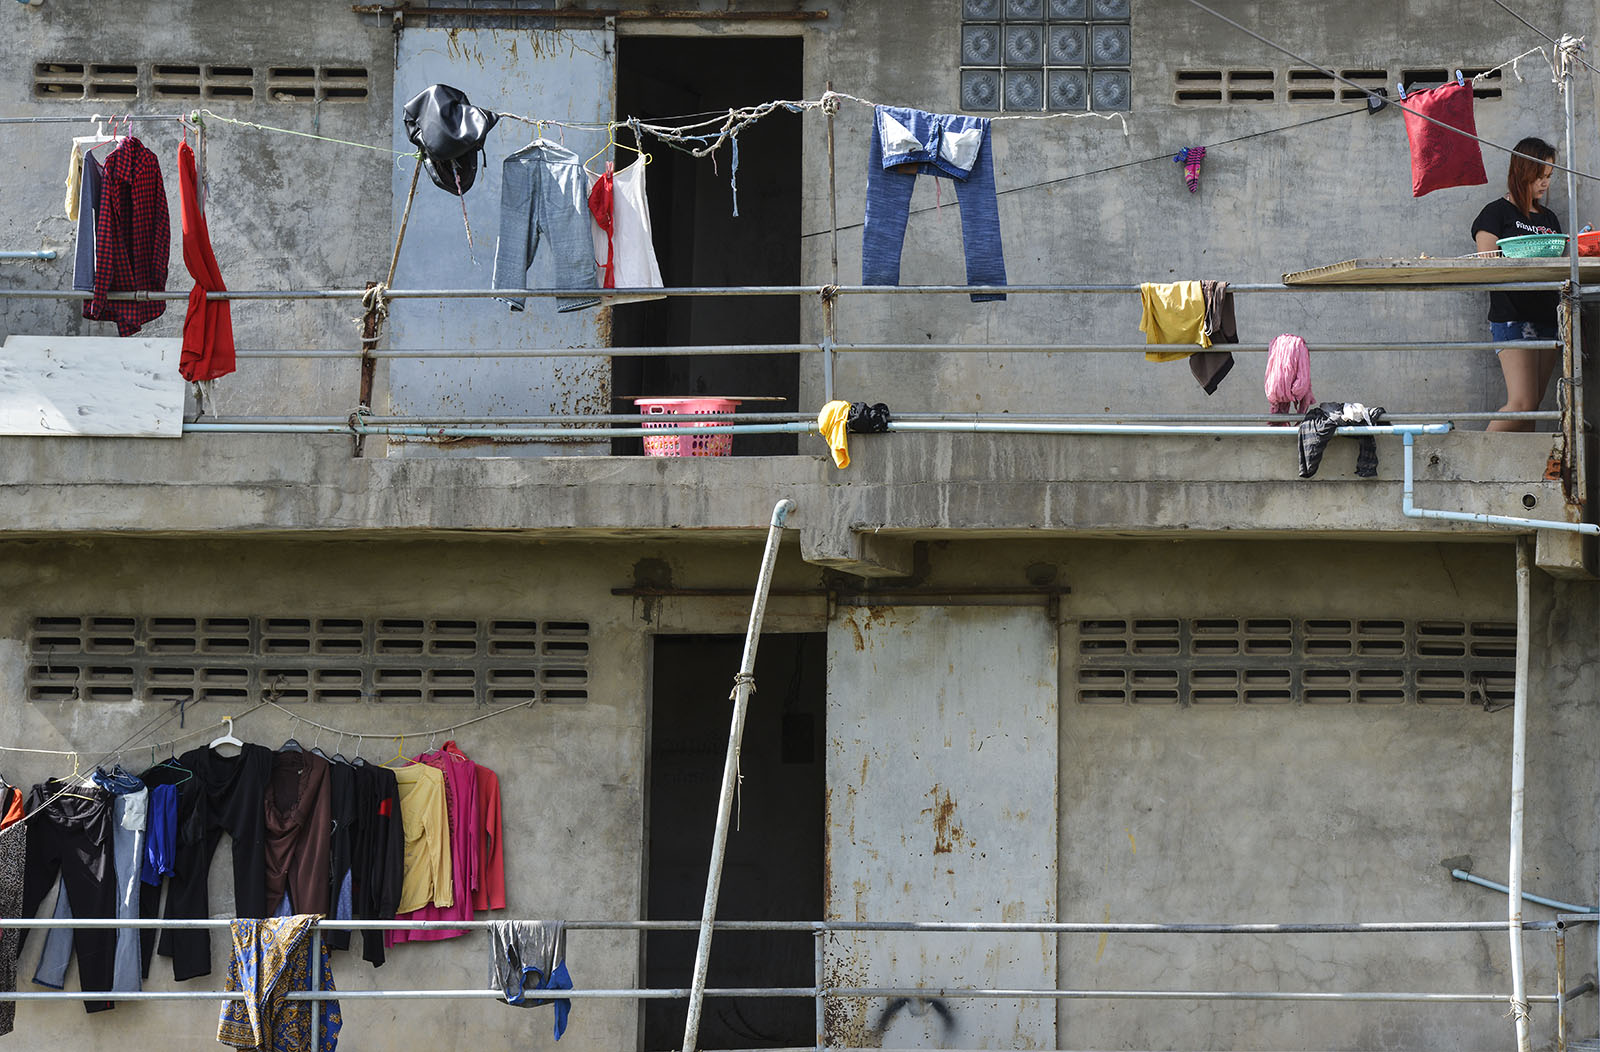 A laundry day in Phnom Penh, Cambodia factory workers hanging up their clothes to dry